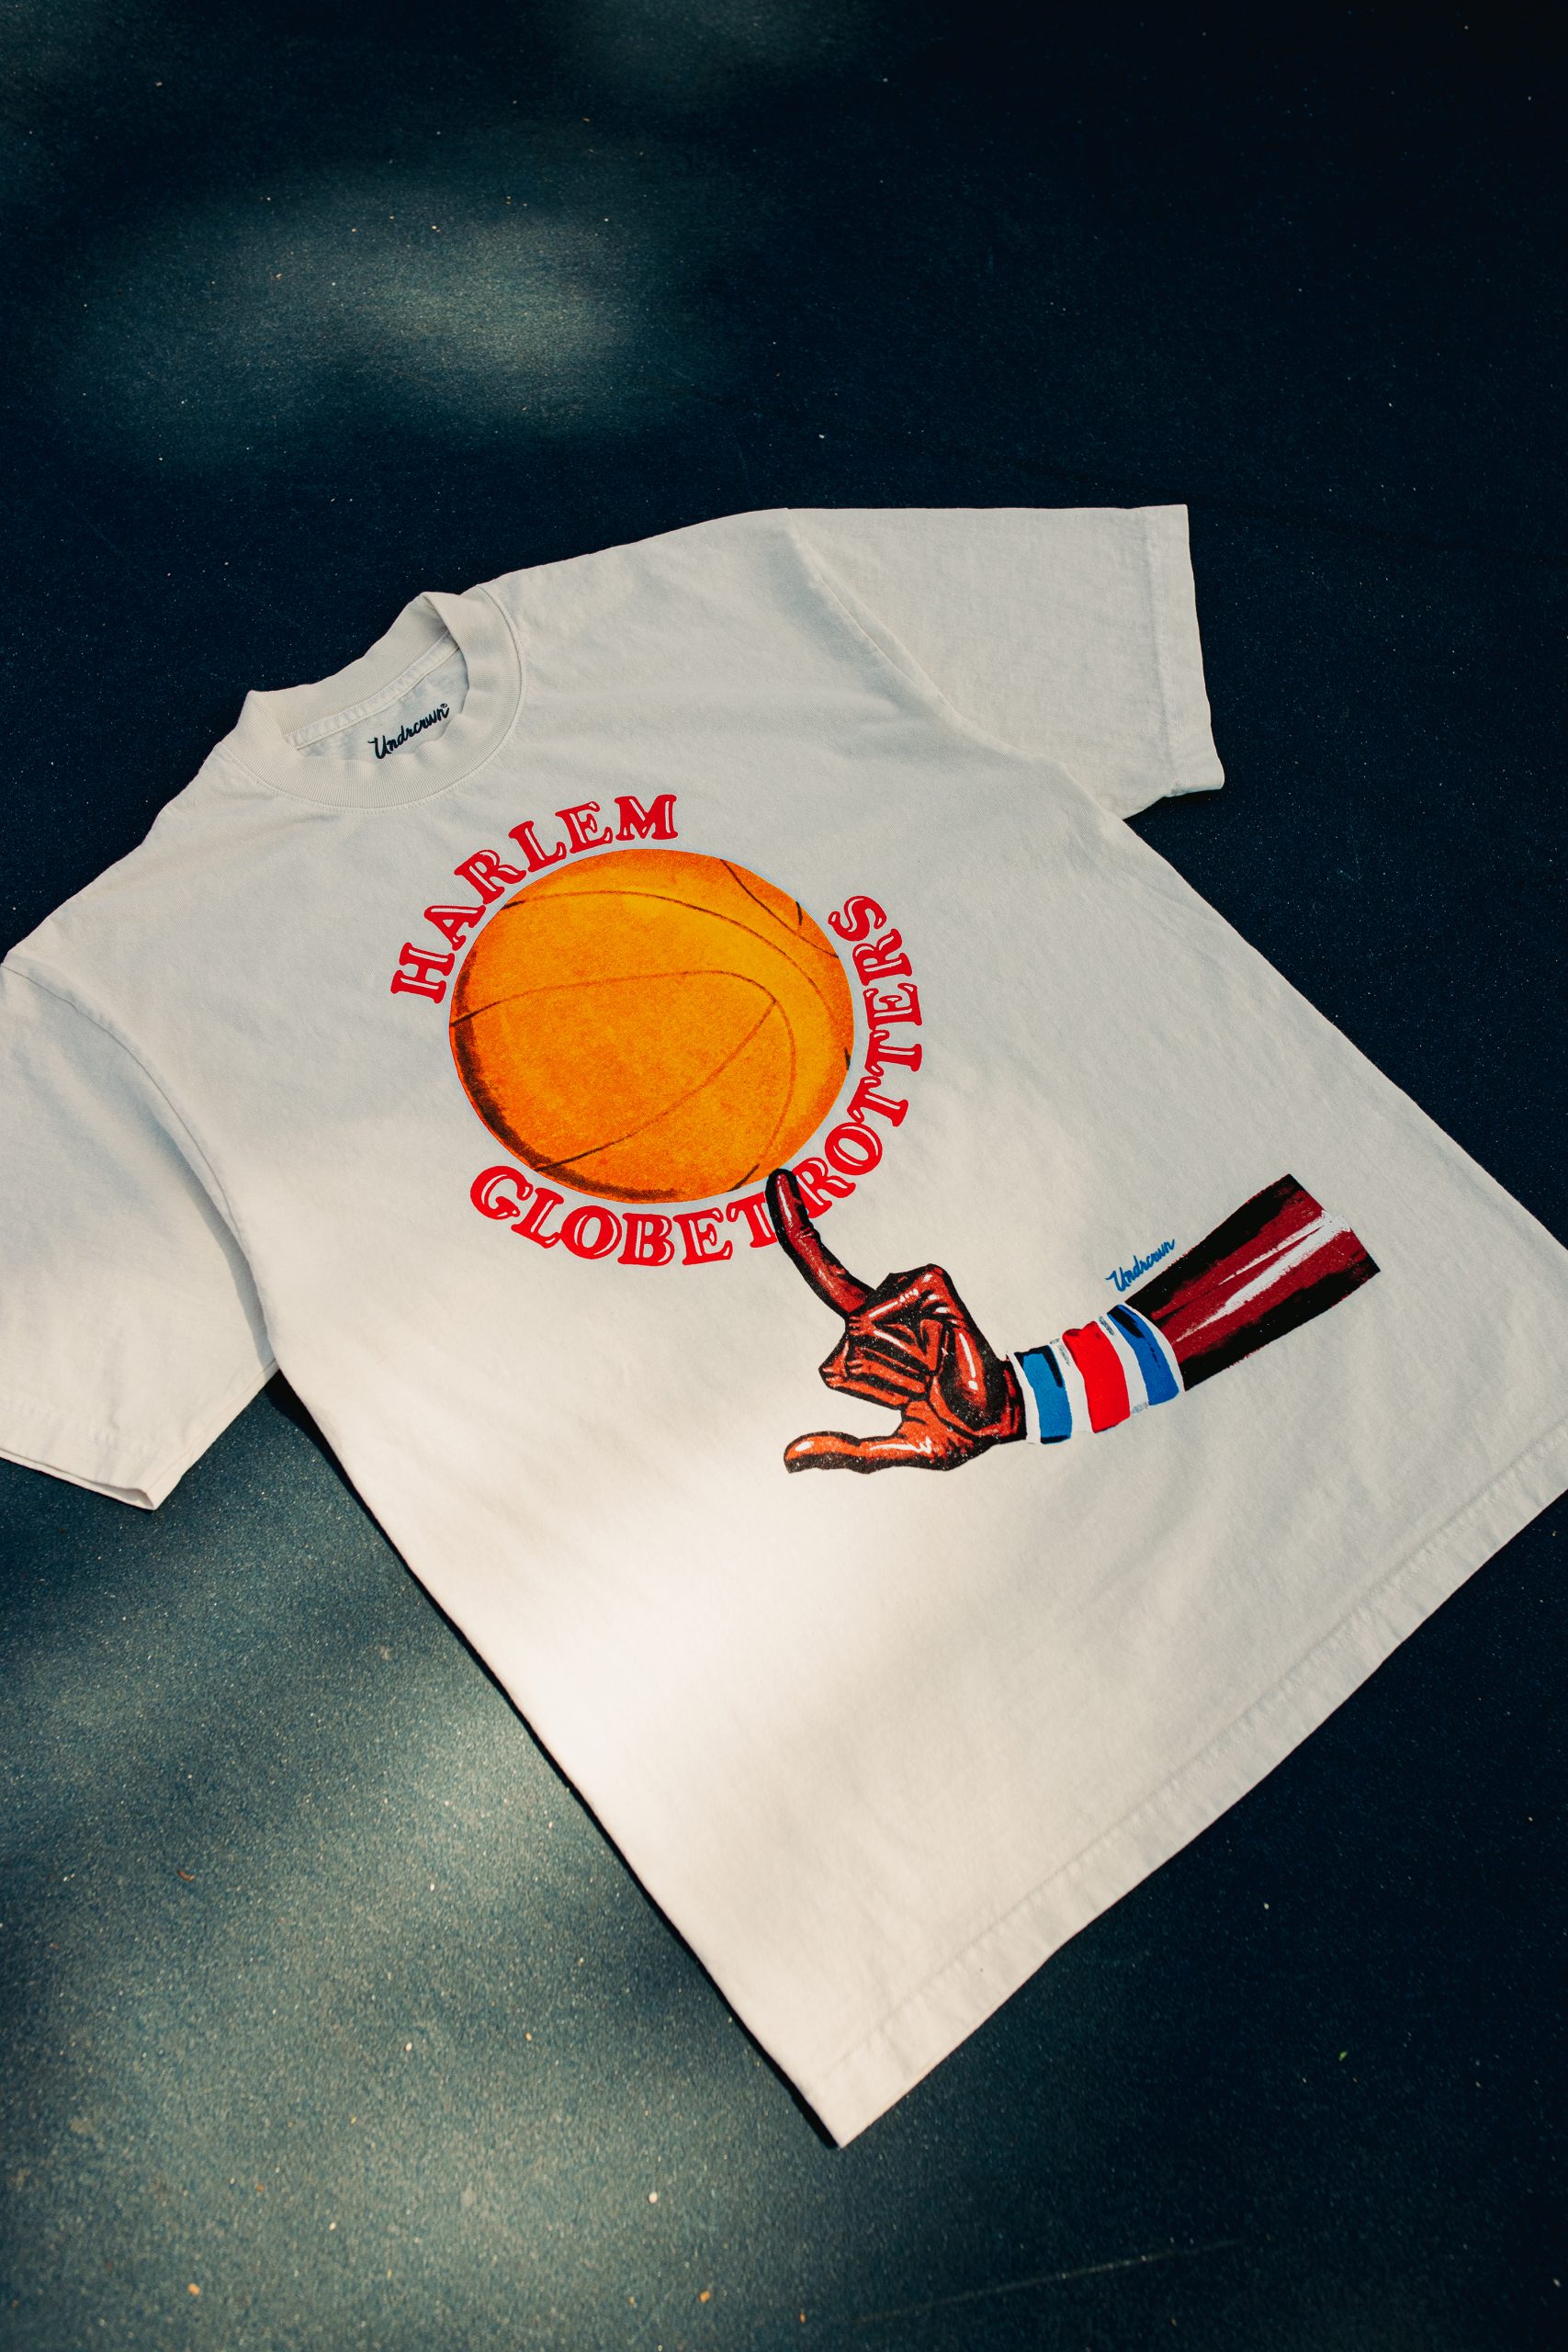 UNDRCRWN x Globetrotters Capsule Collection Honors the Legacy of the Harlem Globetrotters